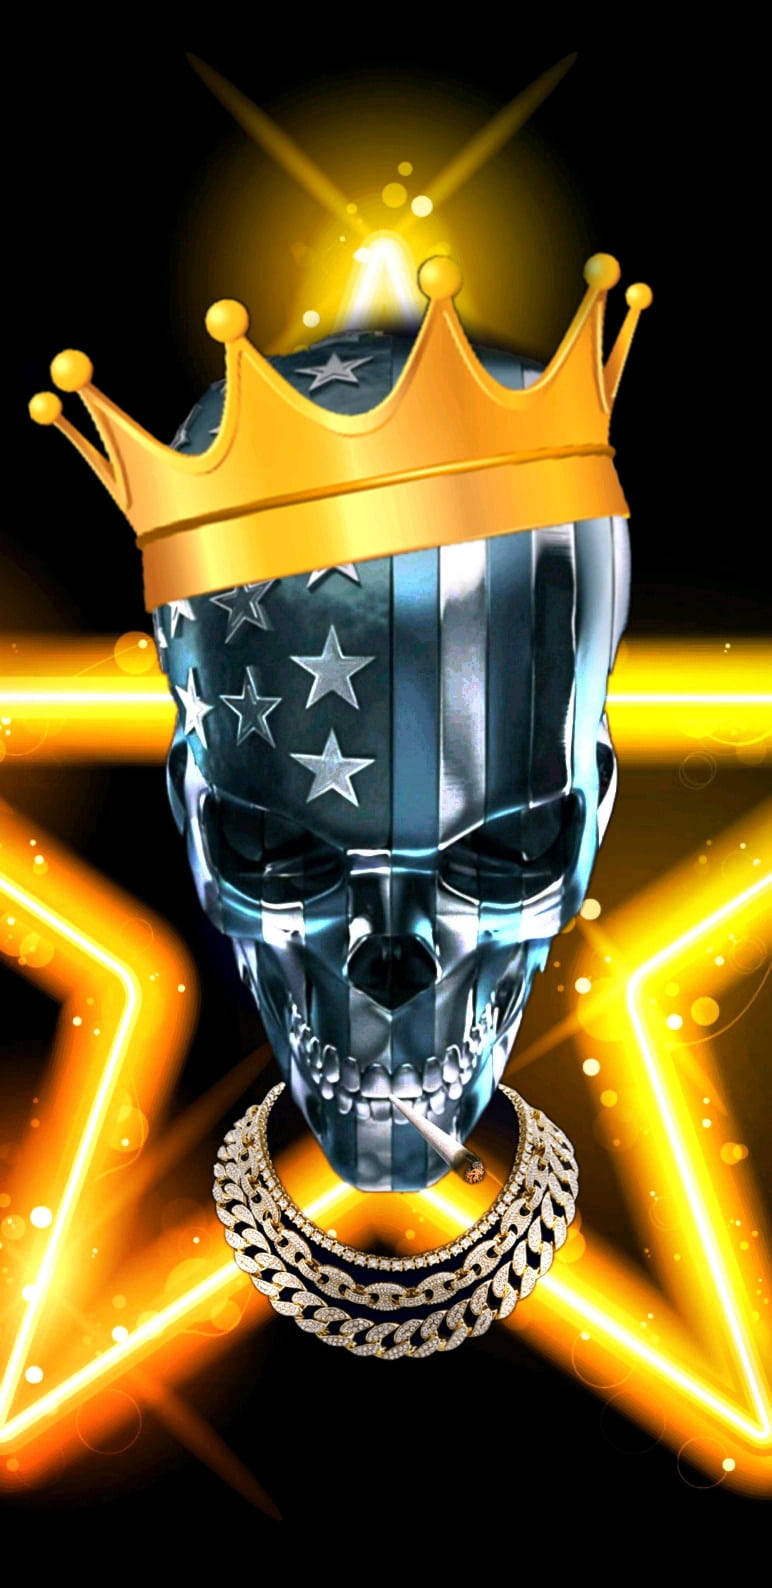 Gangster Skeleton Wearing A Crown And A Chain Wallpaper